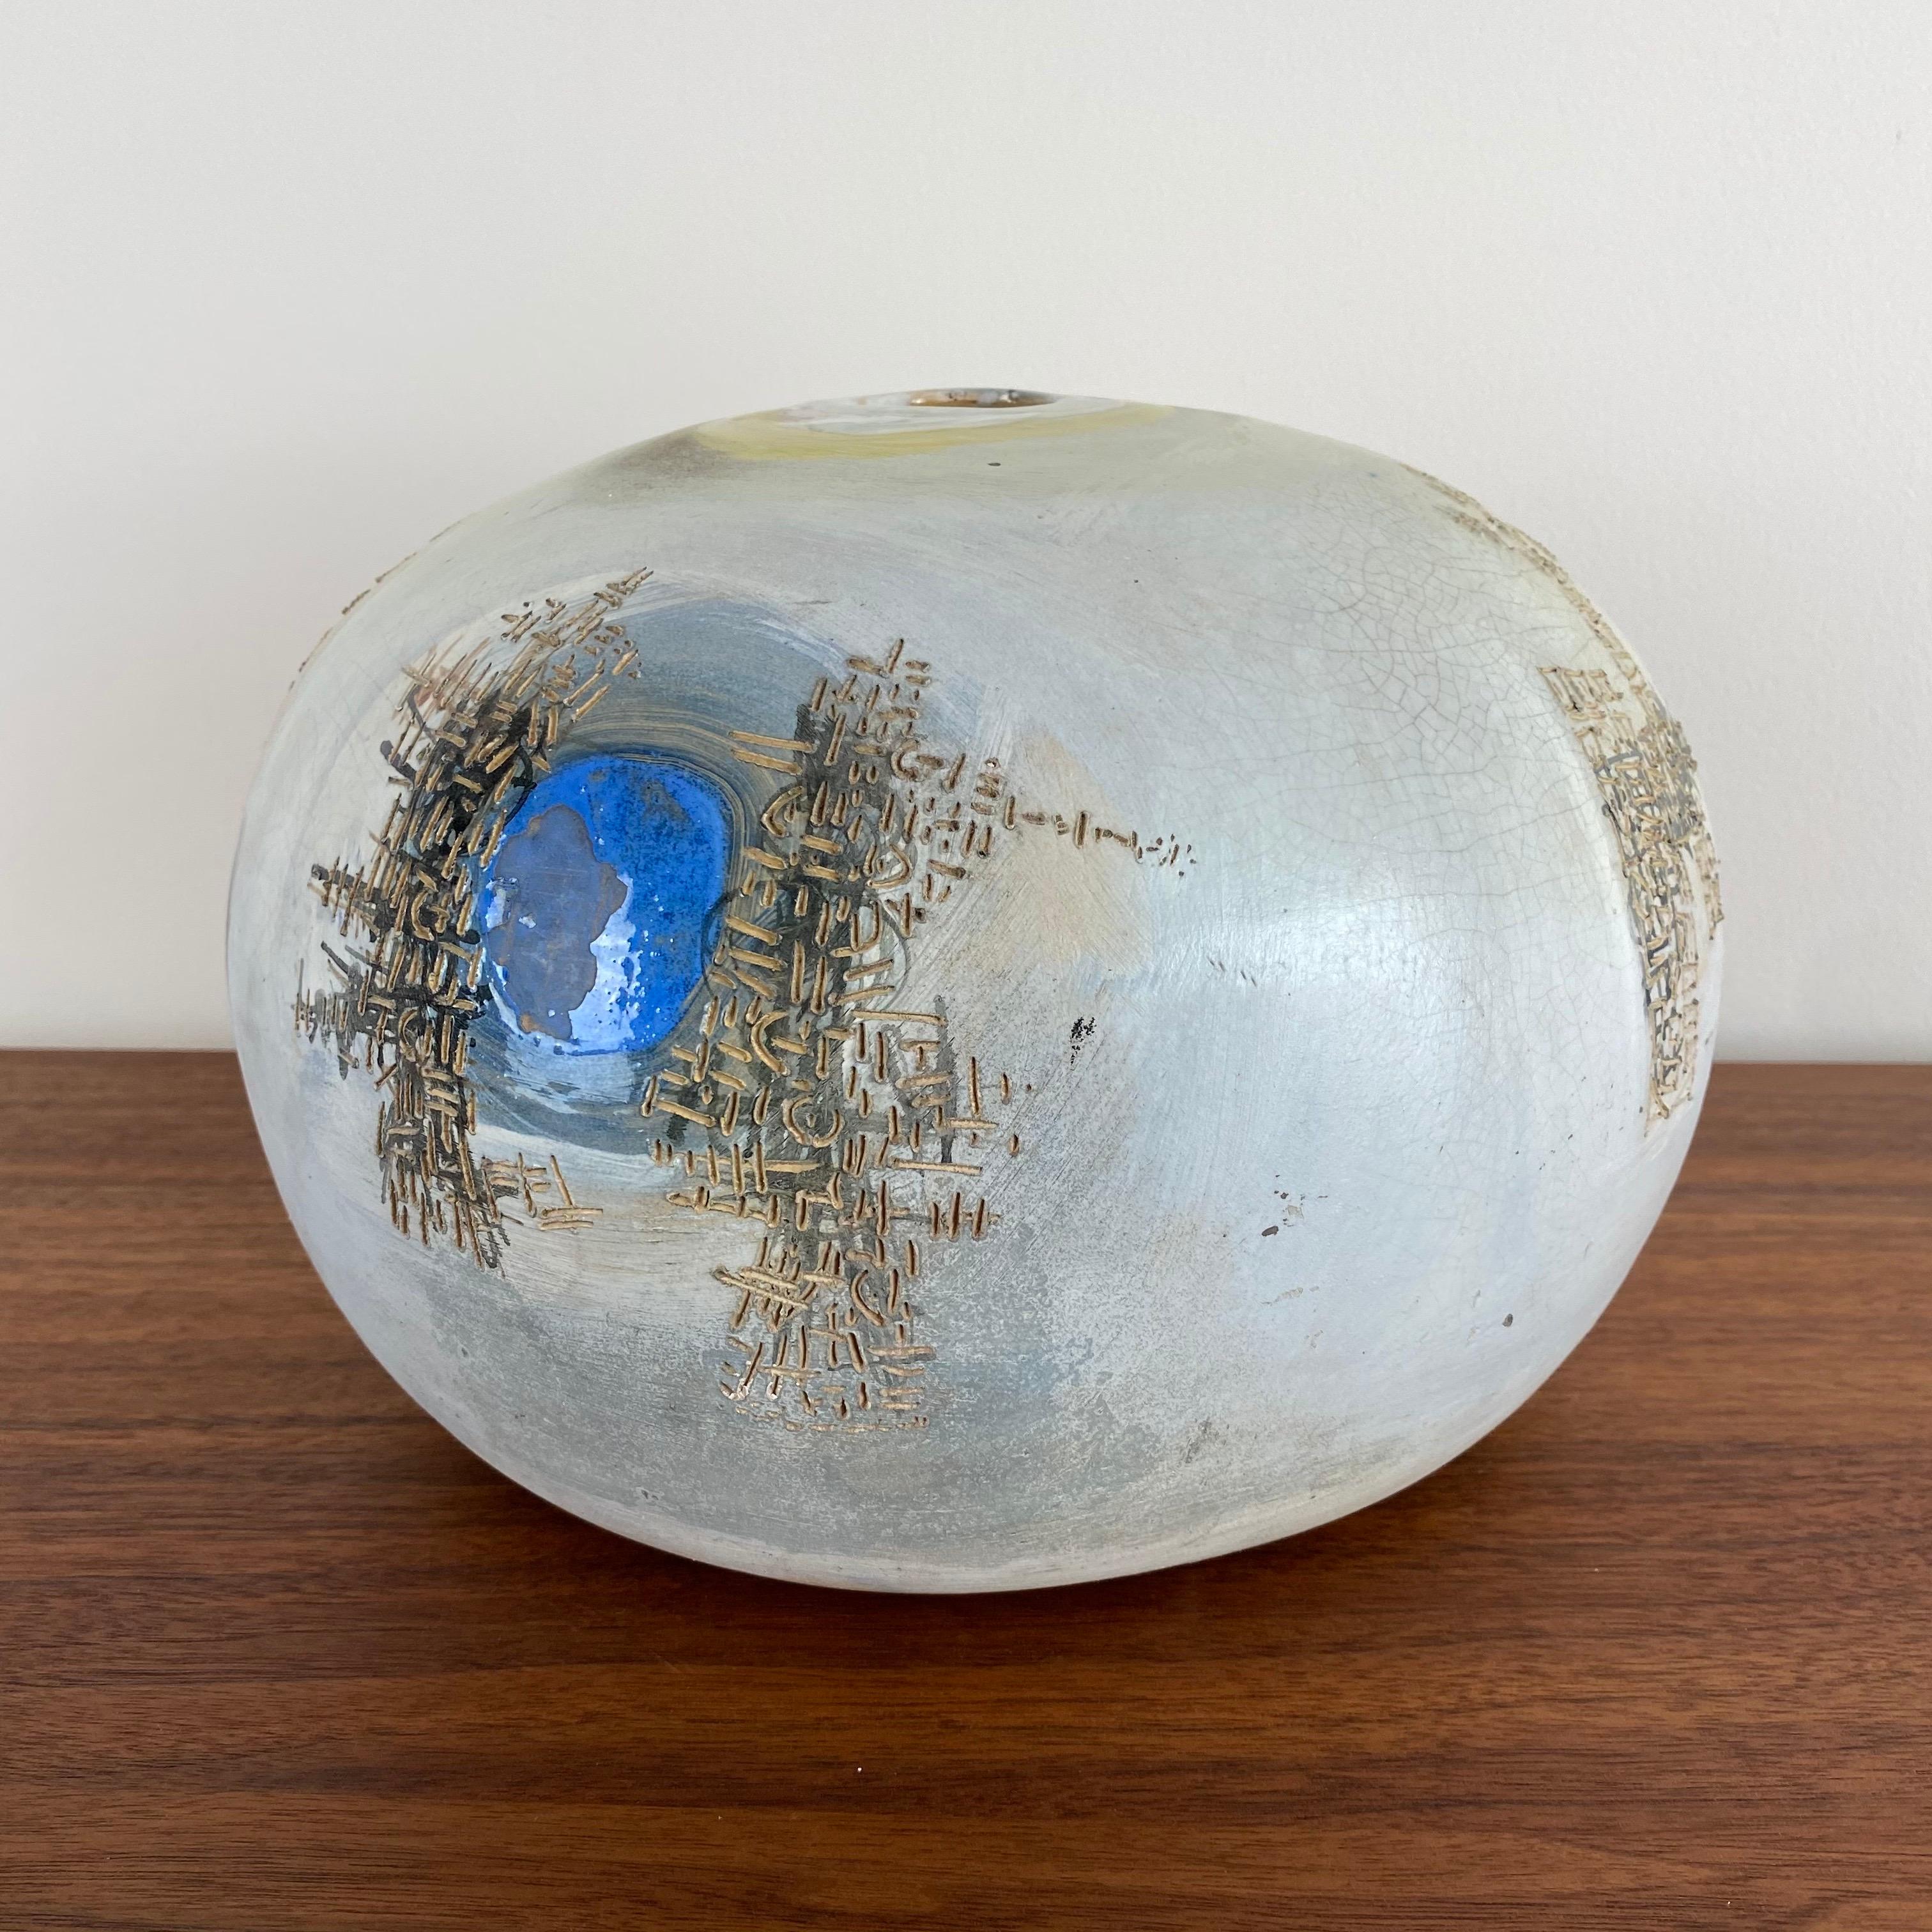 This bulbous vase has a soft blue glaze with abstract designs around the body. Multi-colored with texture and movement.